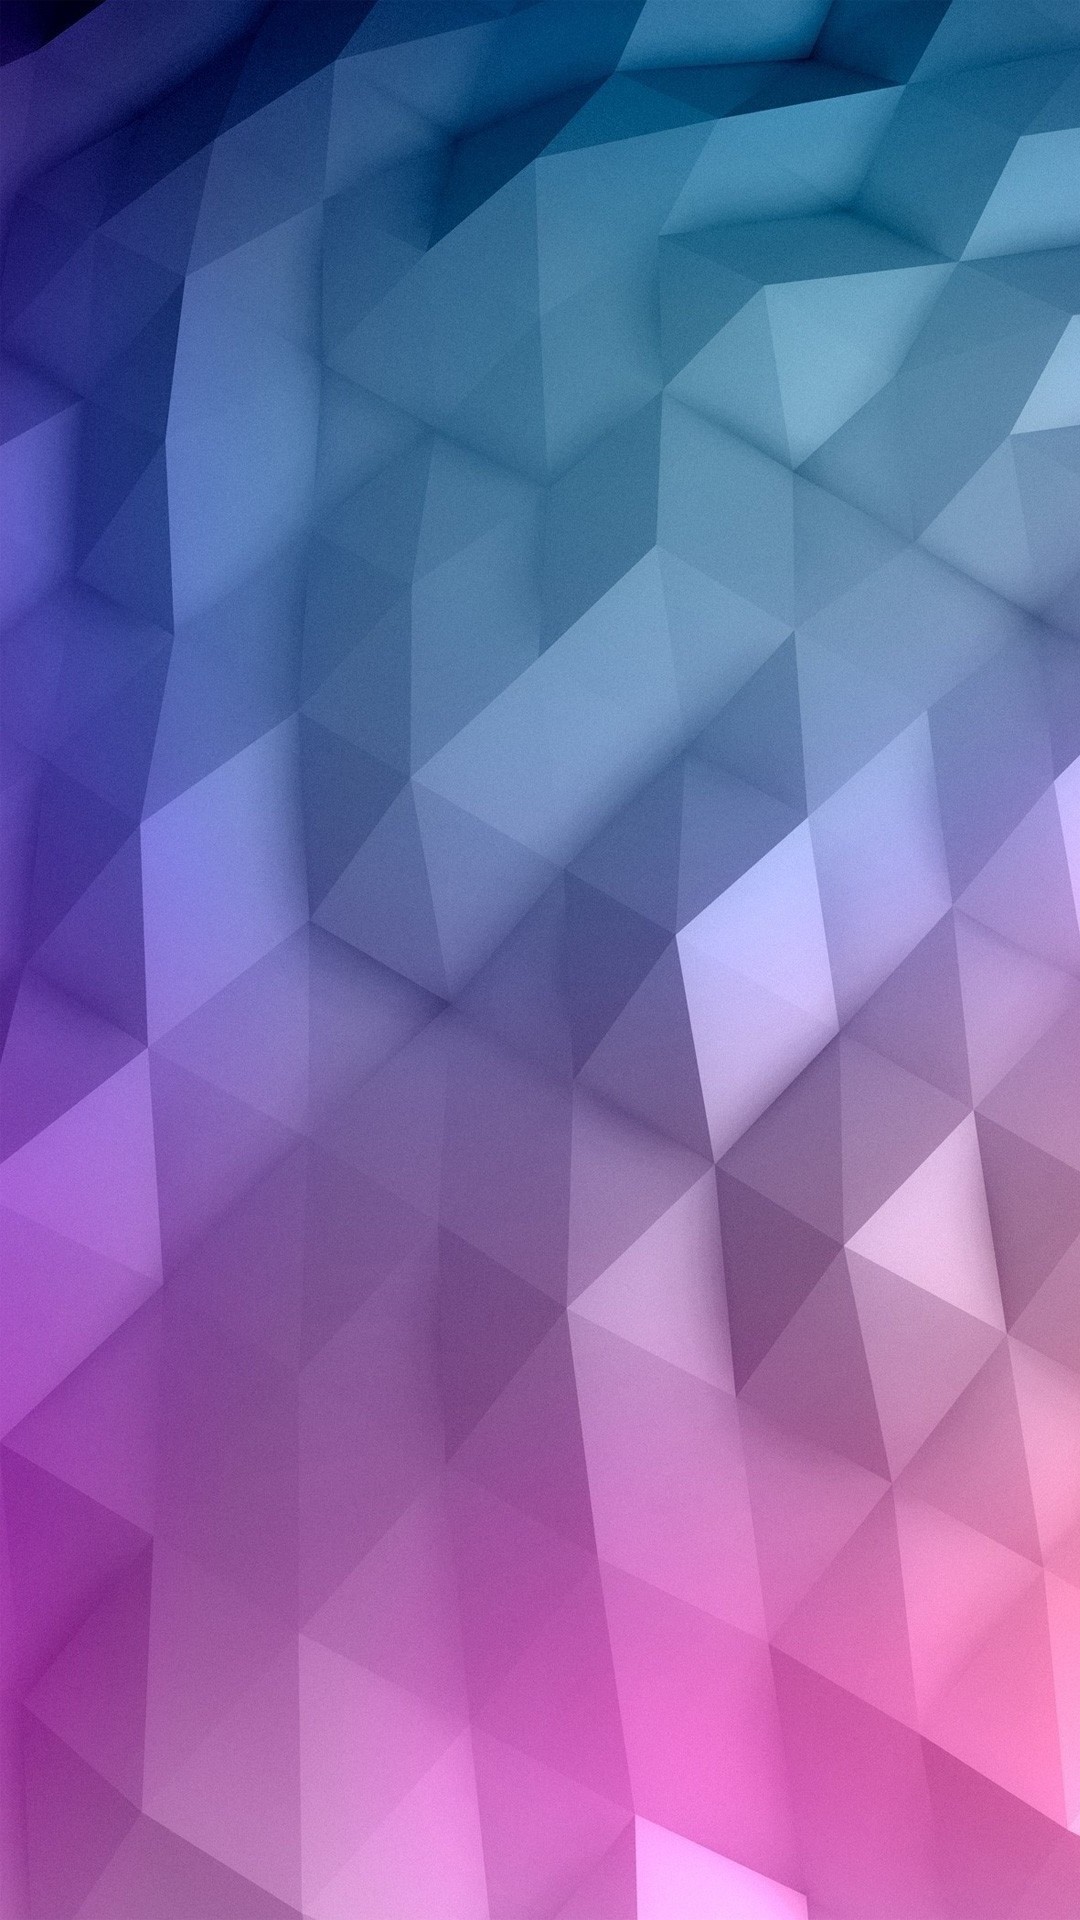 1080x1920 Amazing Polygon Abstract LG G2 HD Wallpaper - http://helpyourselfimages.com/